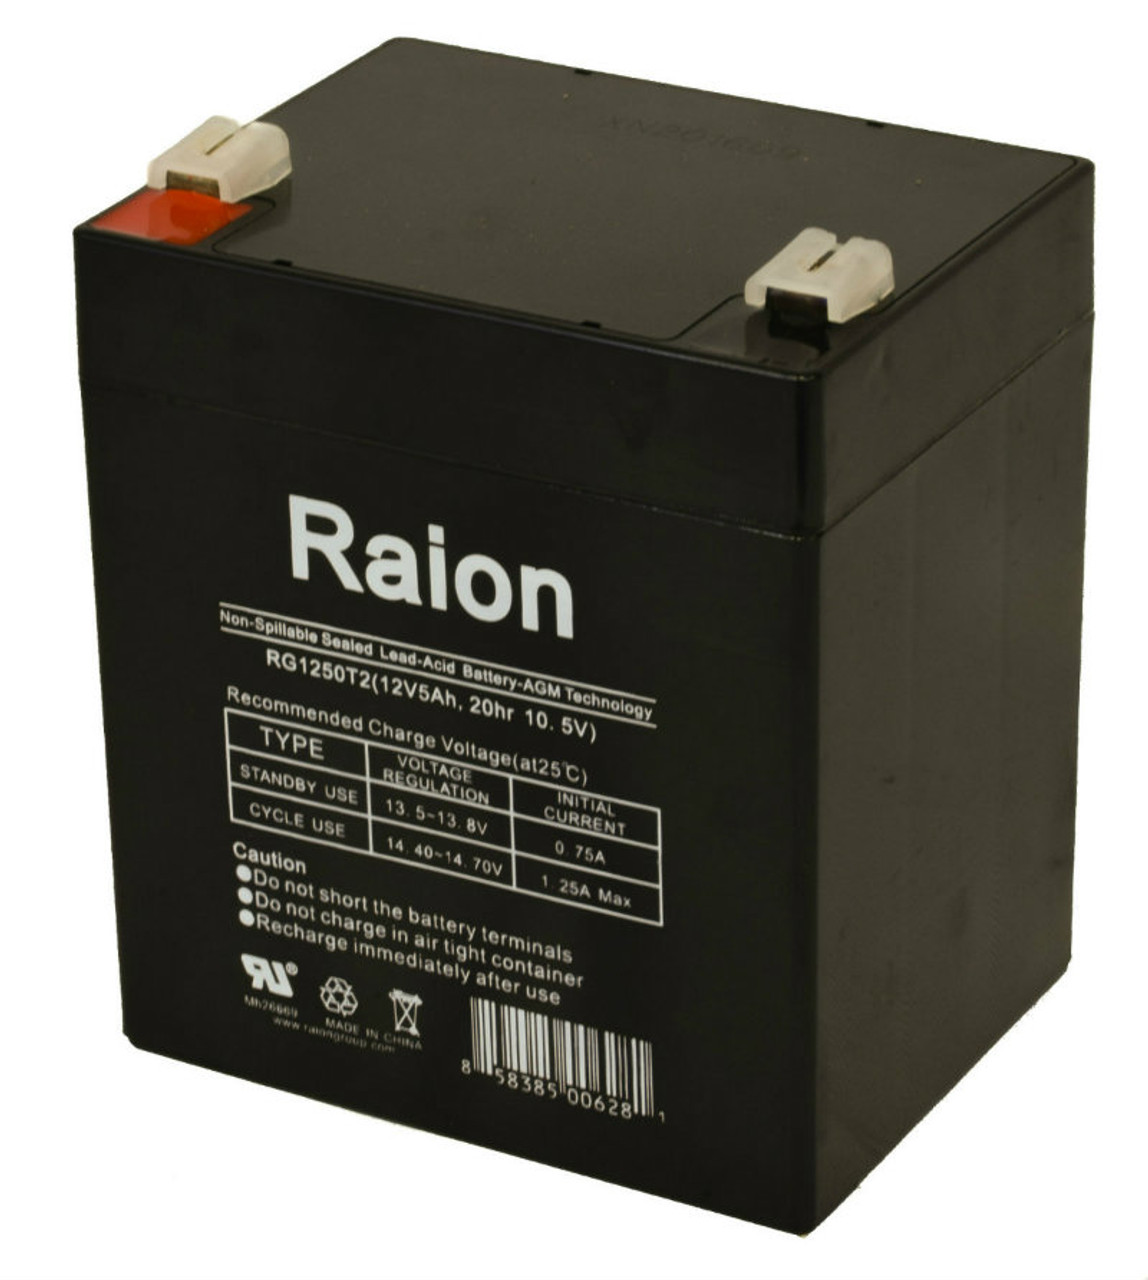 Raion Power RG1250T1 Replacement Battery for Dongjin DJ12-5.0 F1